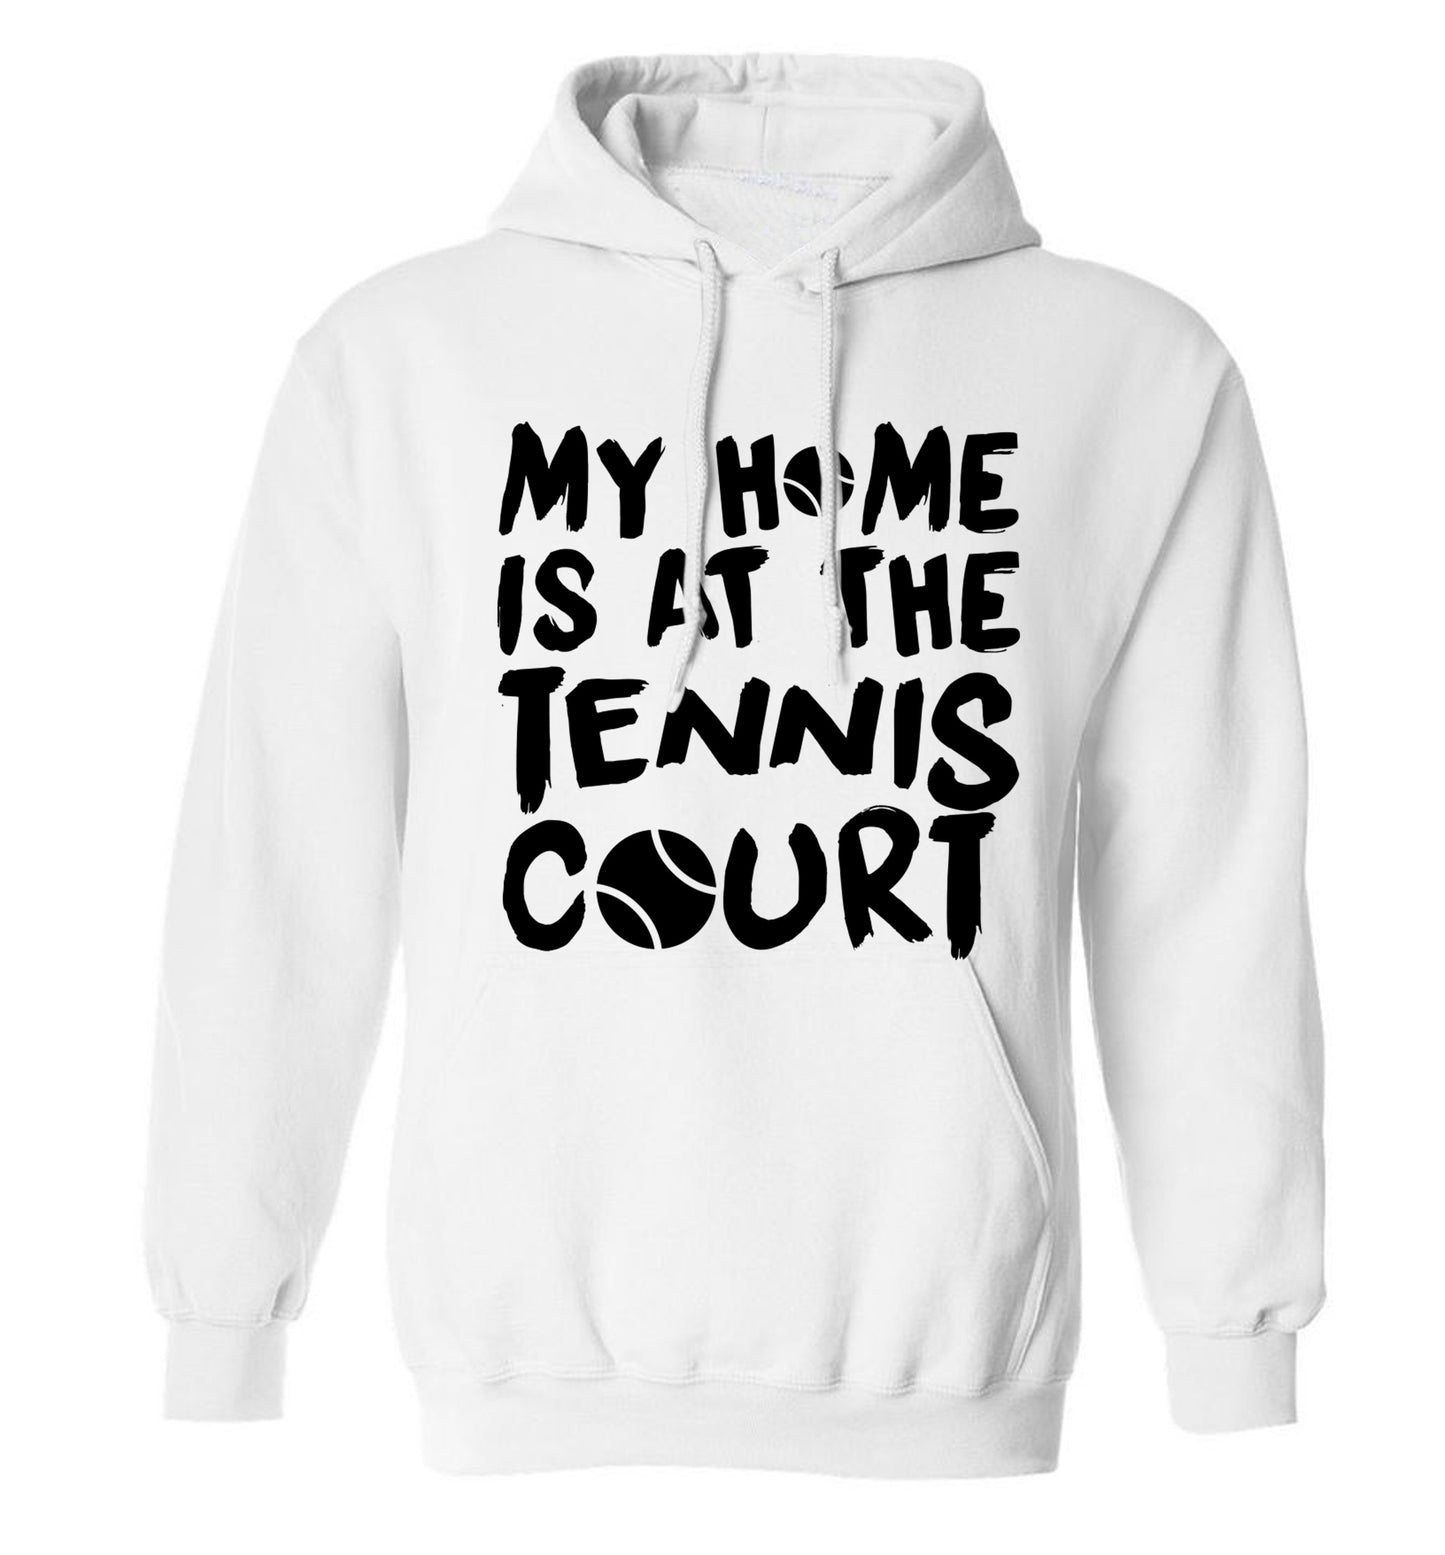 My home is at the tennis court adults unisex white hoodie 2XL